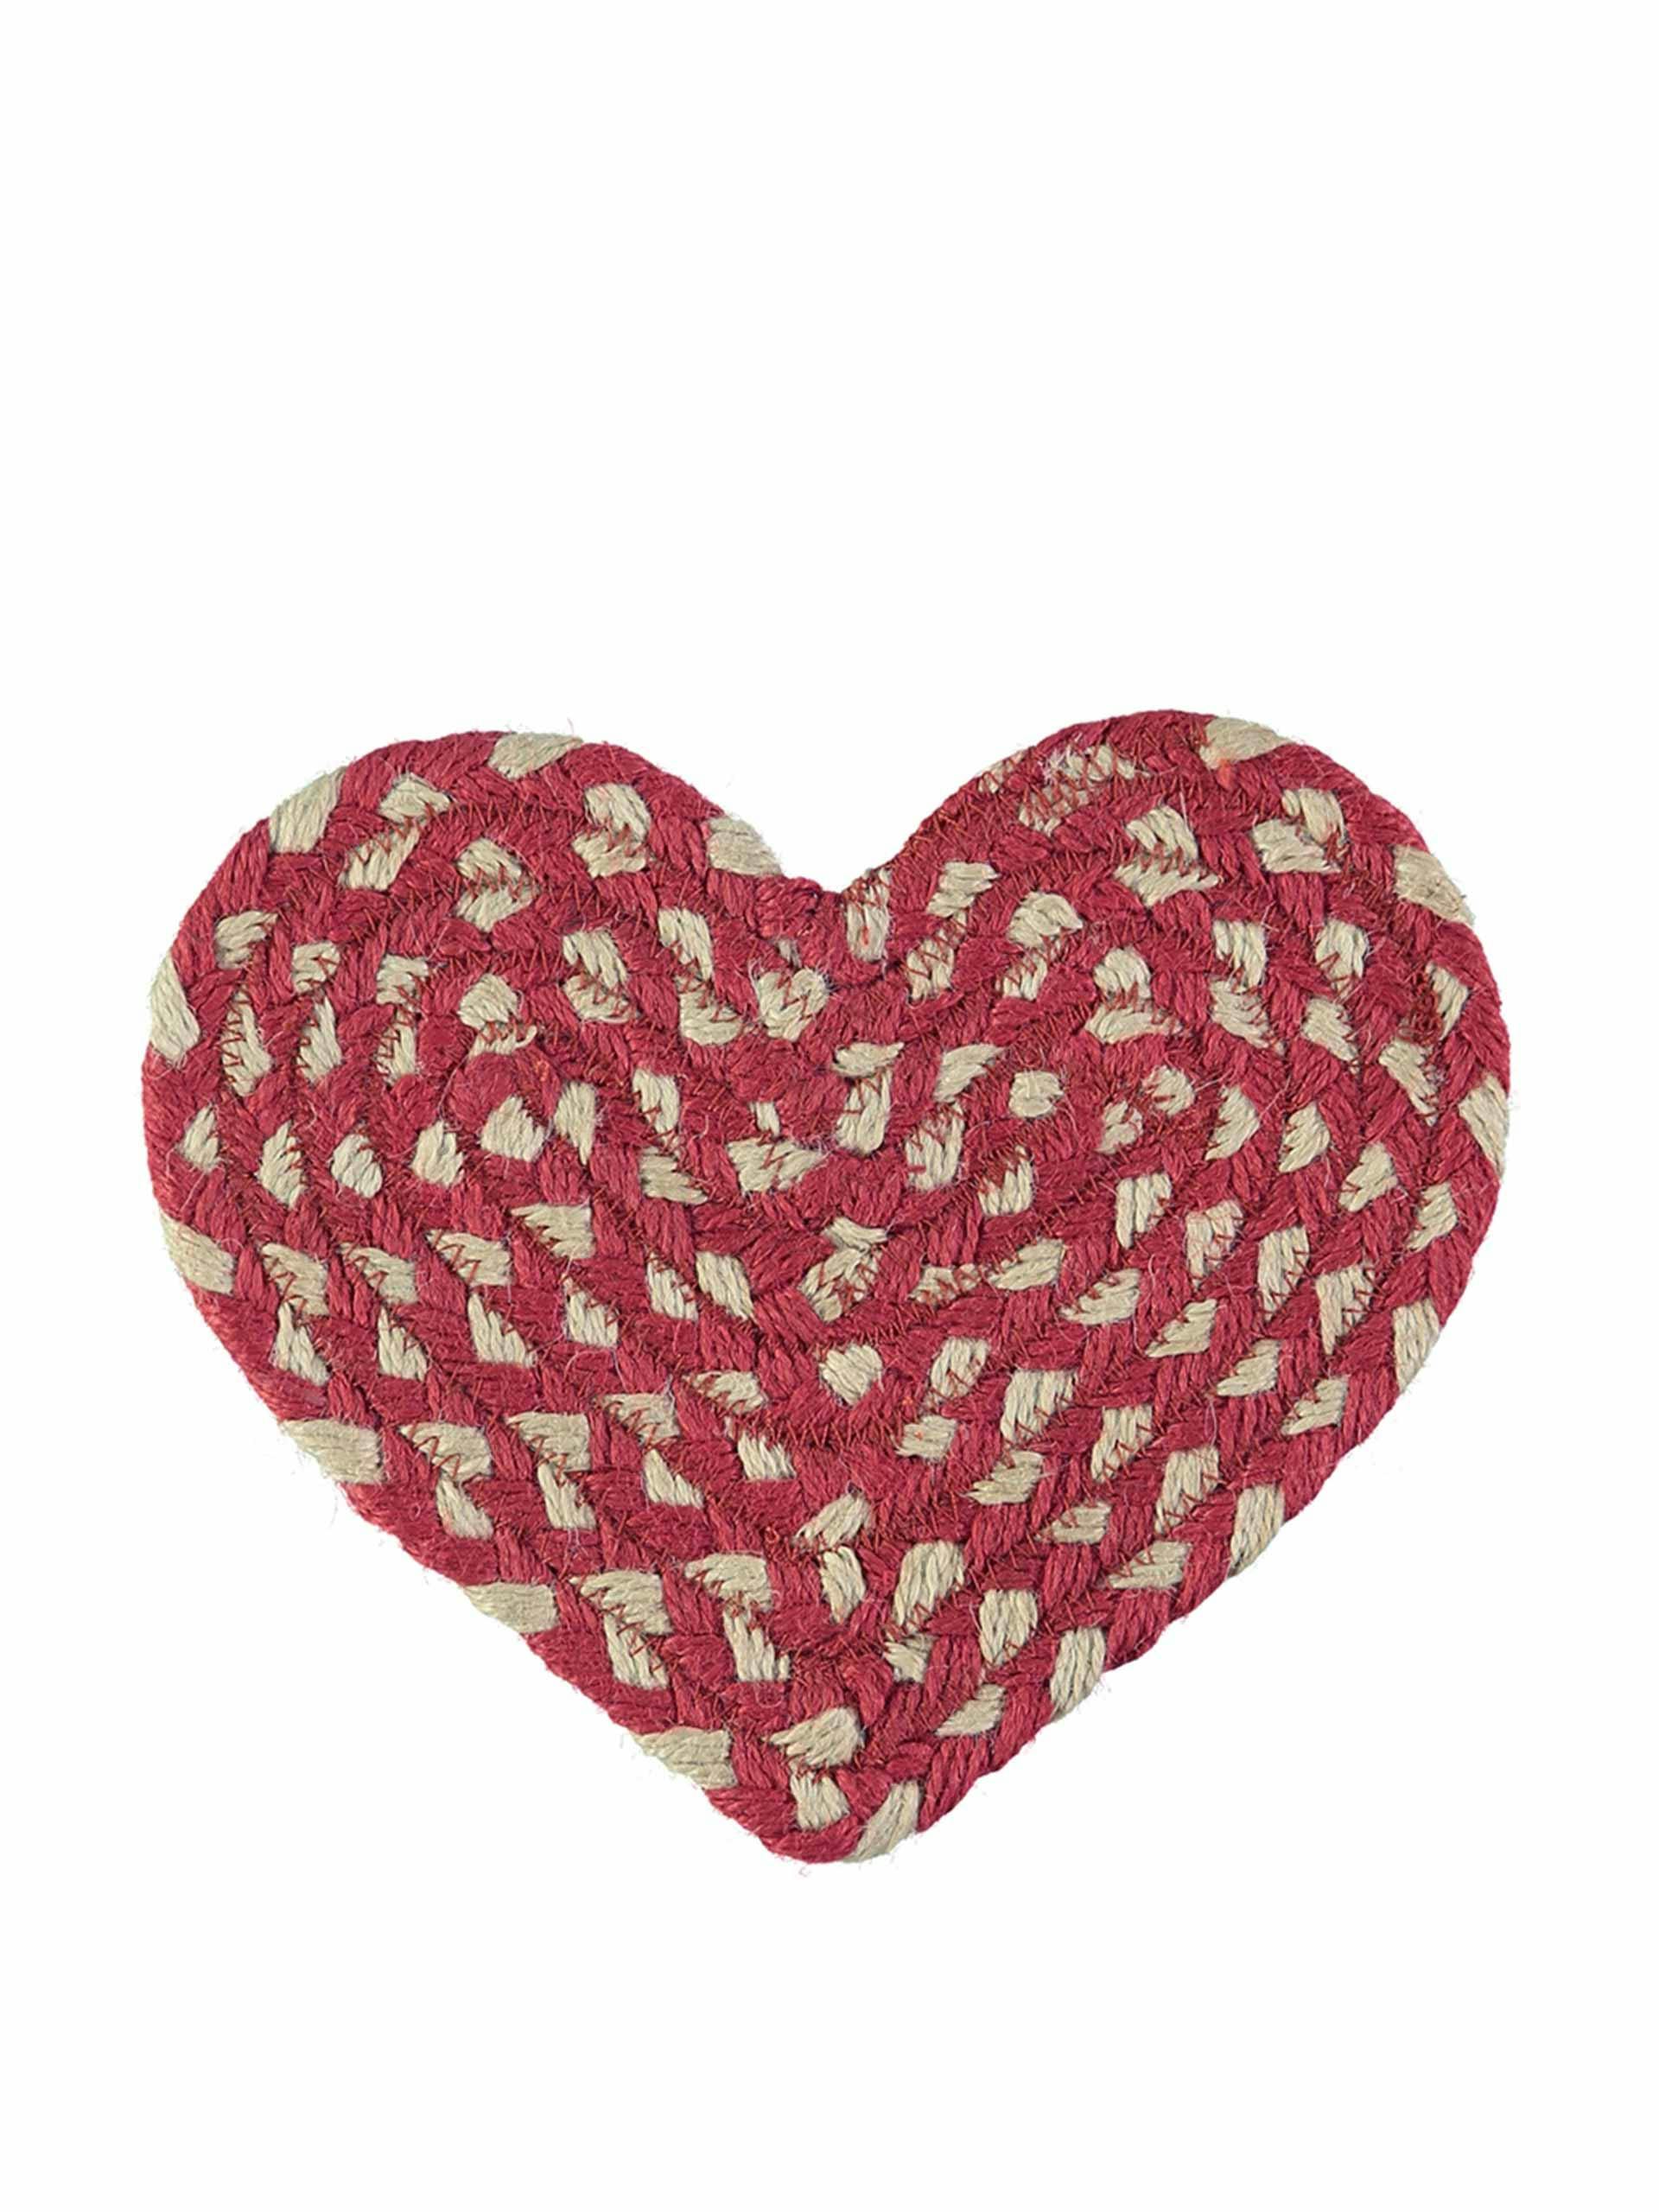 Red/white heart coaster, (set of 4)